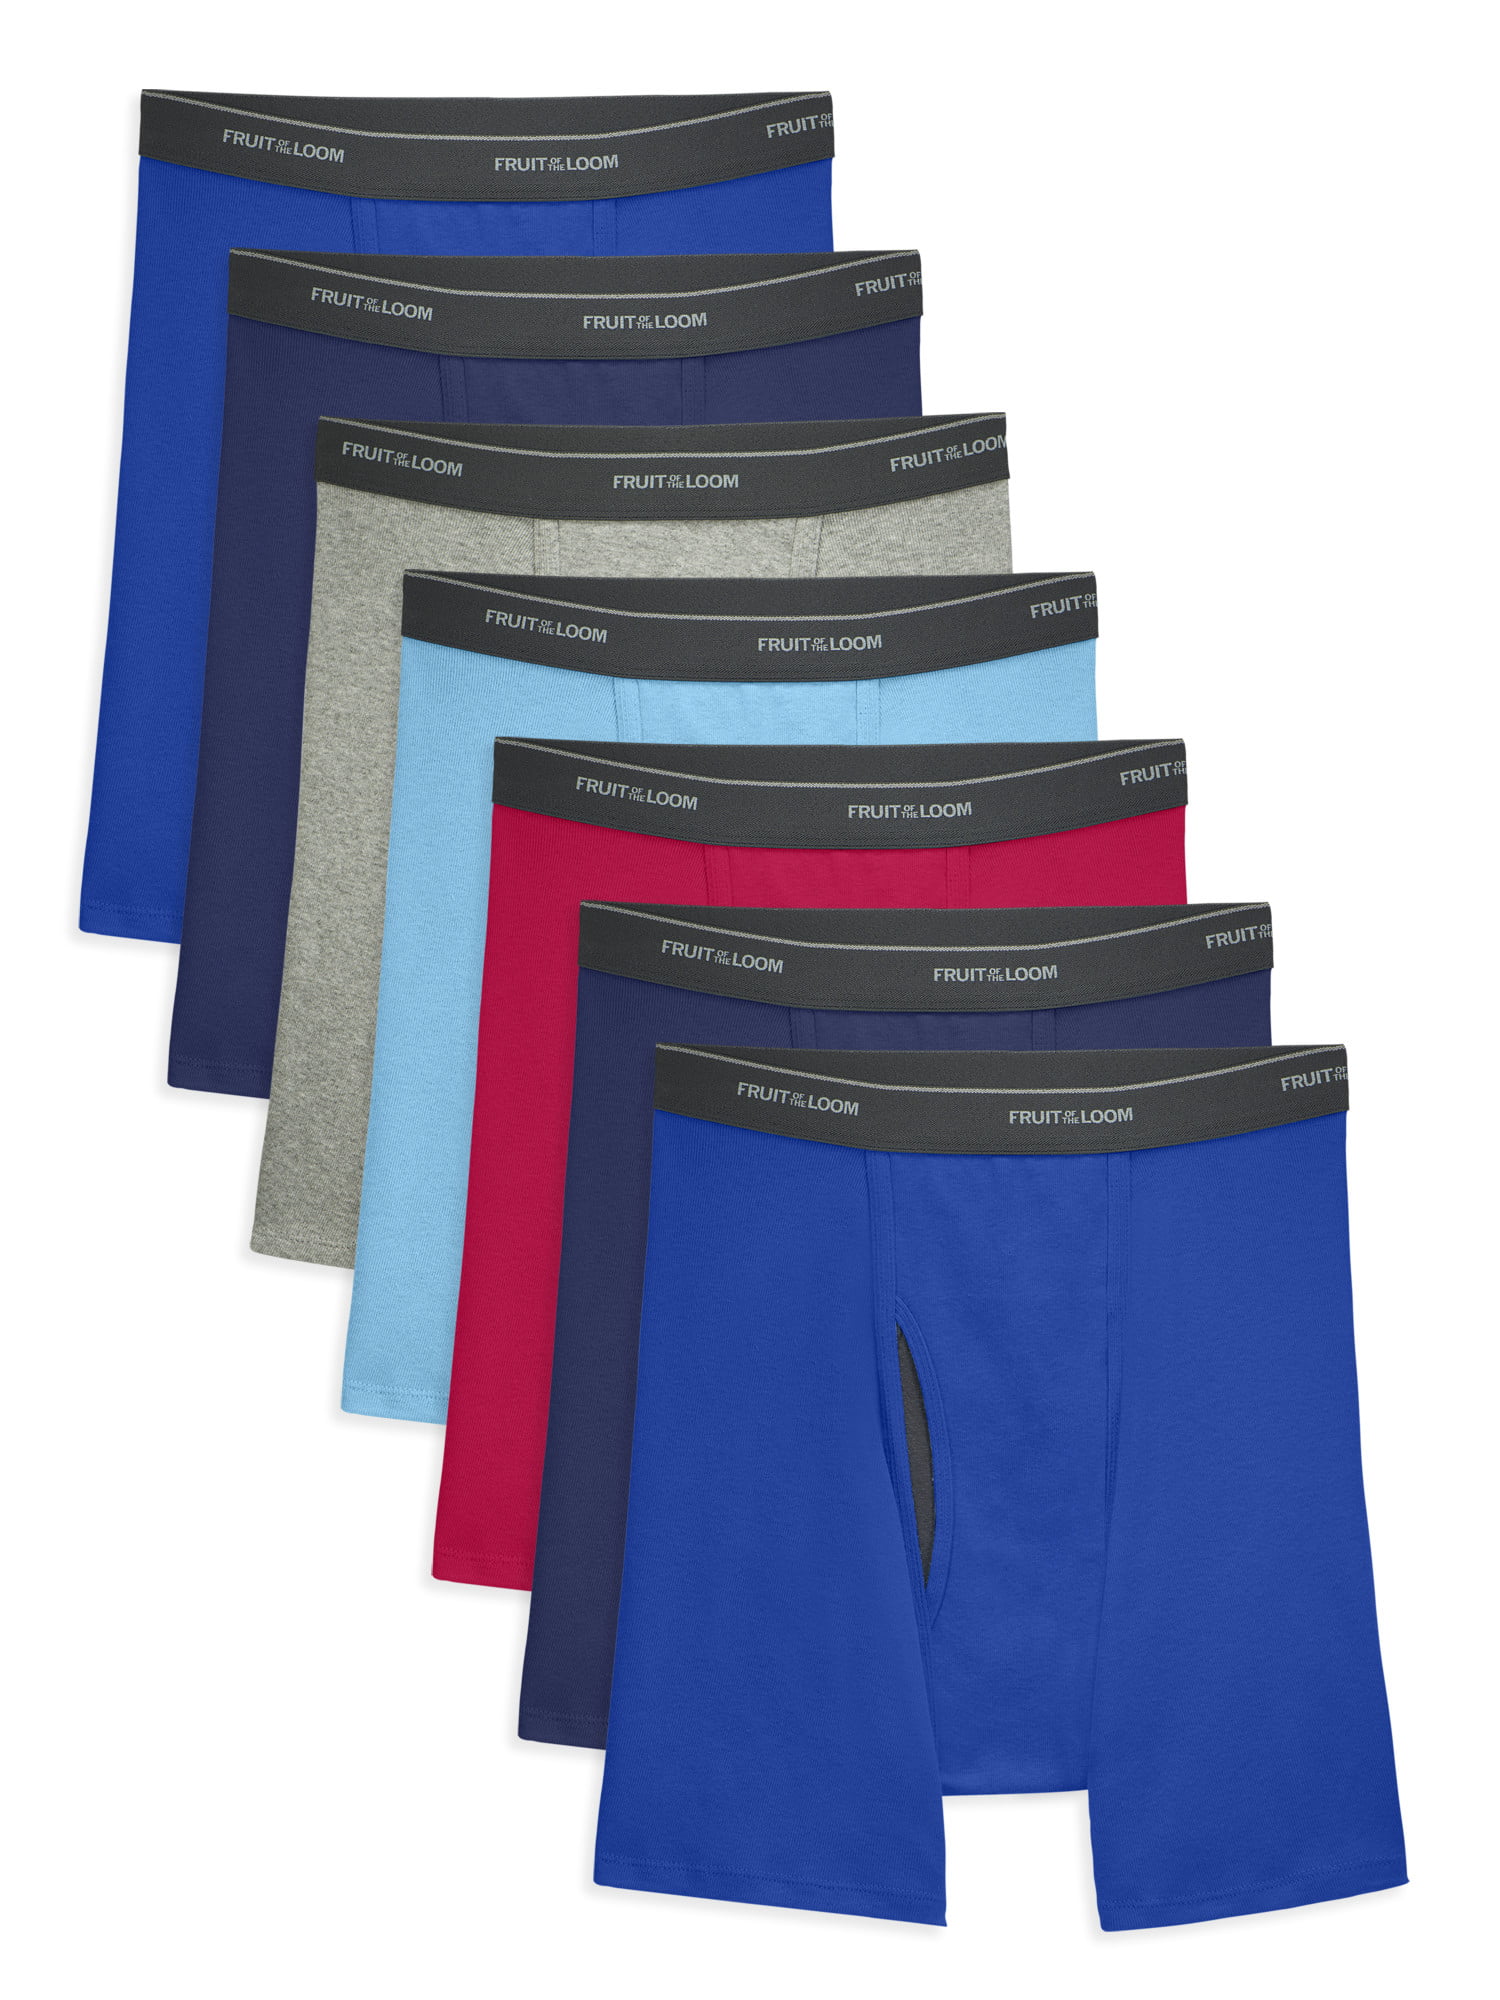 Fruit of the Loom Men's Coolzone Boxer Briefs Assorted Colors 